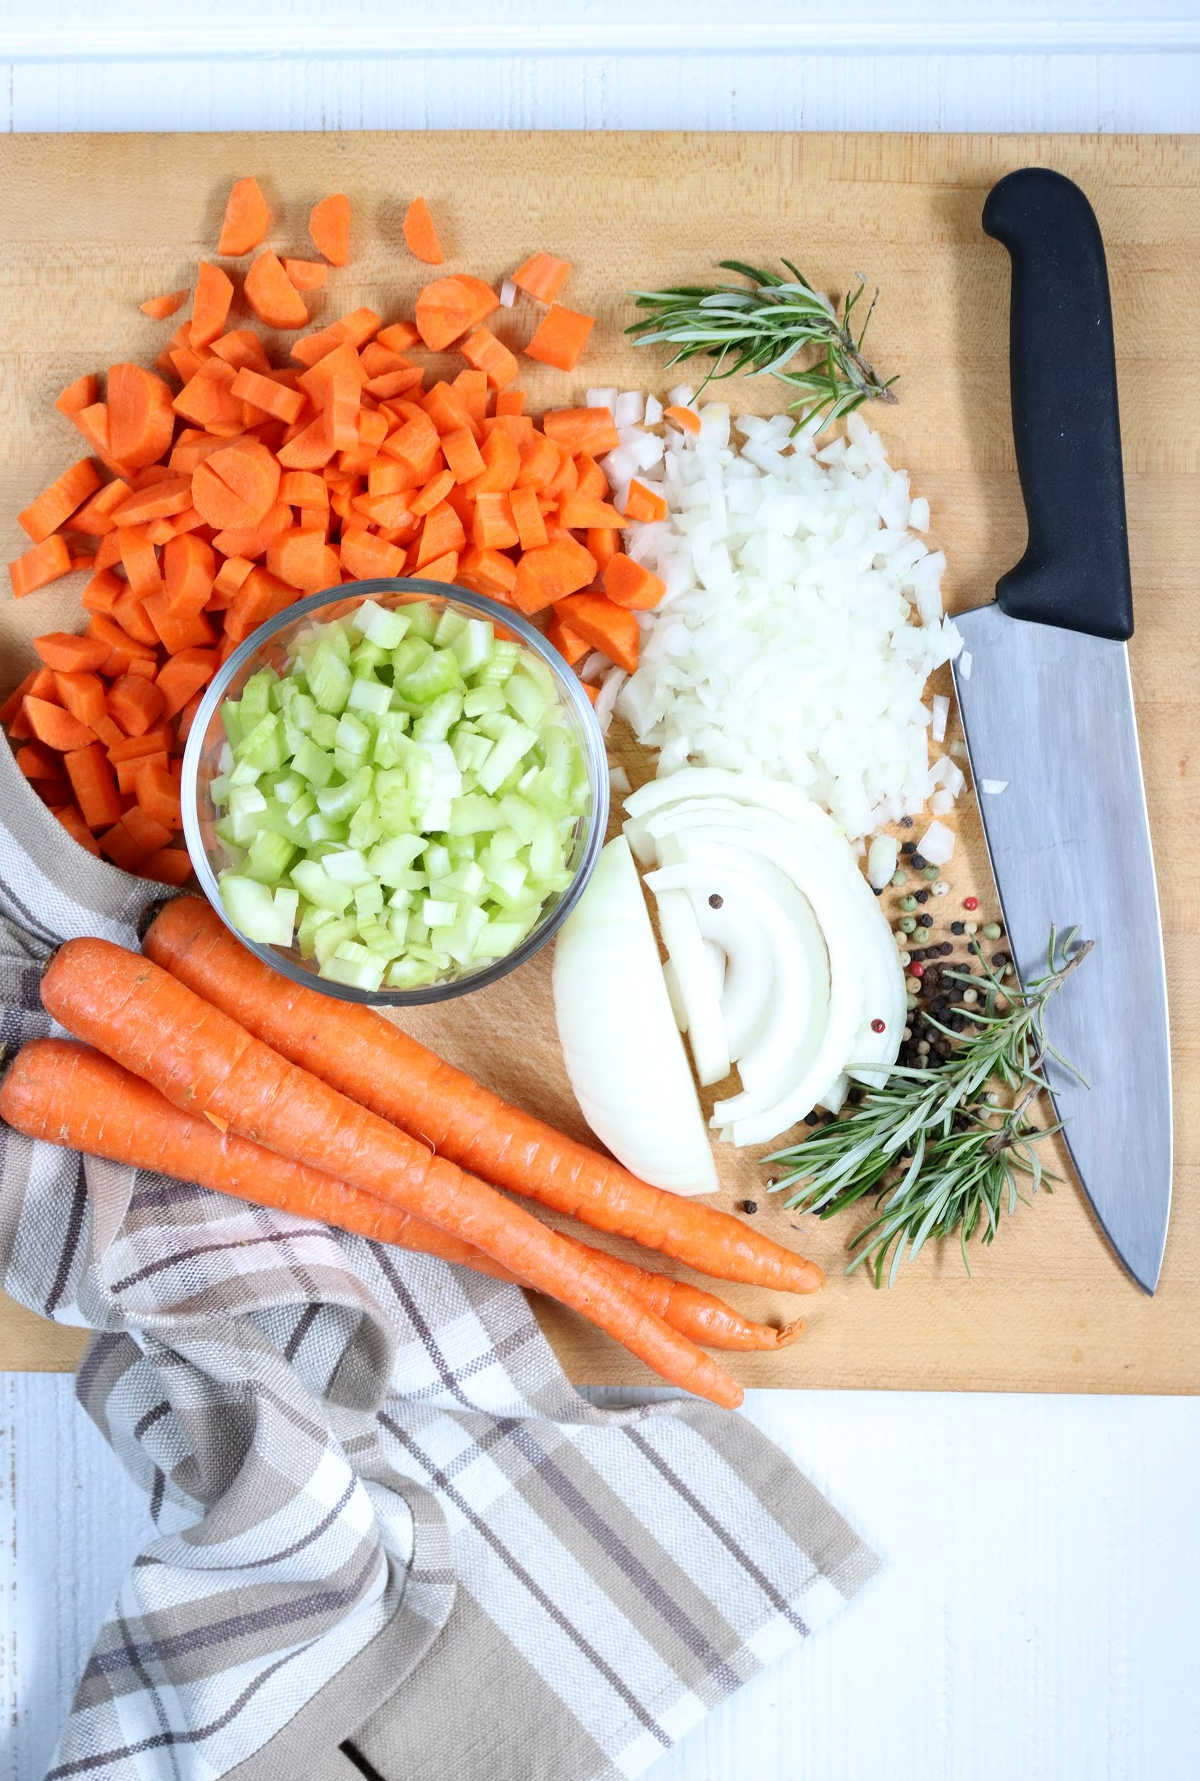 Chopped carrots, celery, onions and fresh rosemary for chicken pot pie on wooden cutting board with chef's knife.